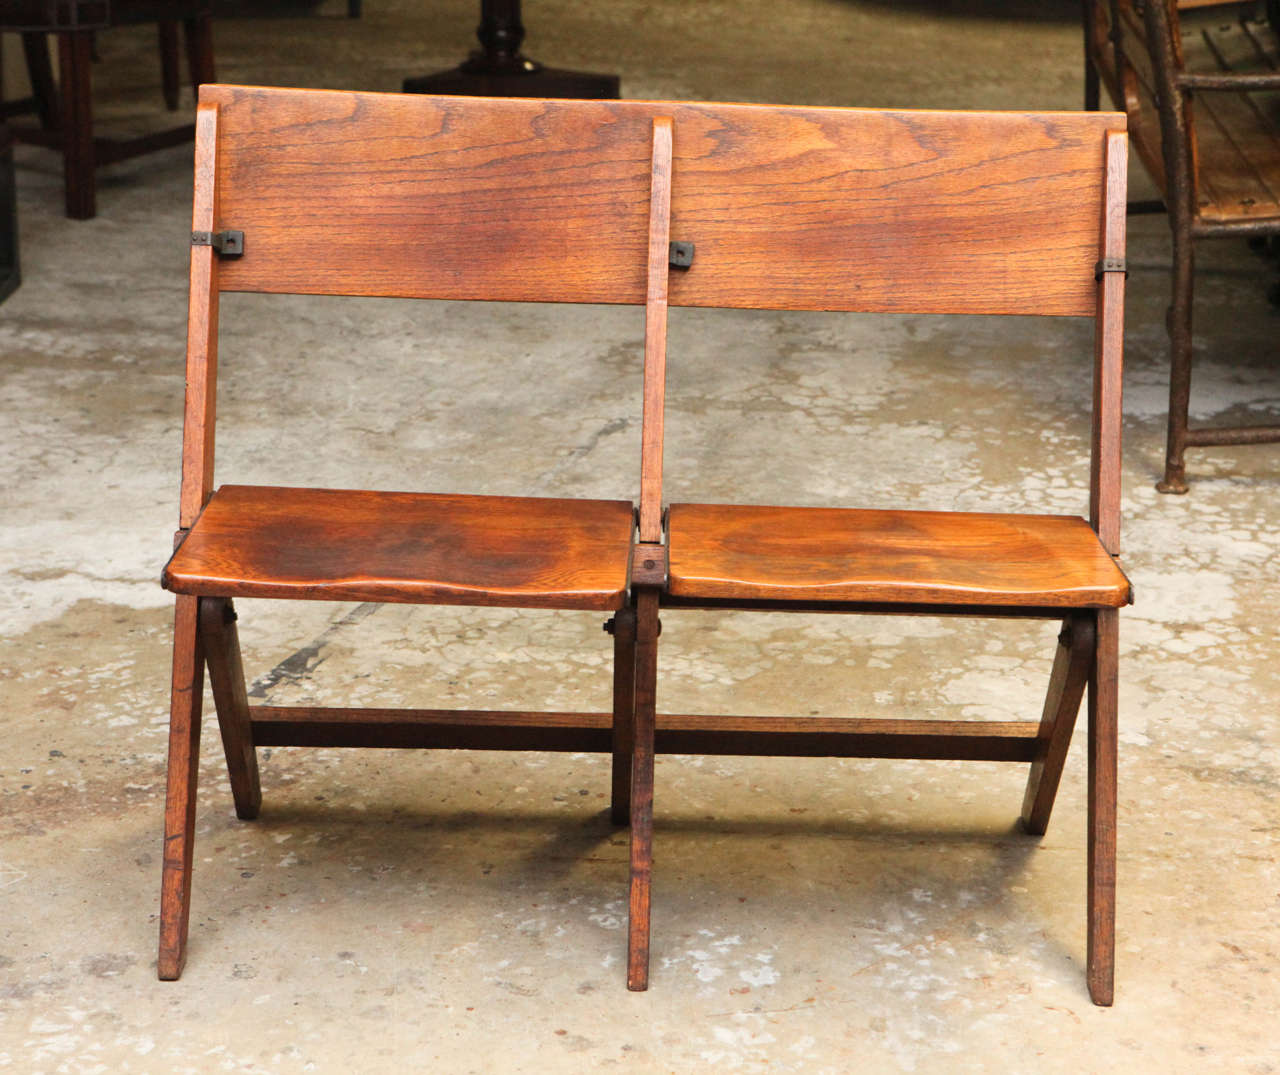 Late 19th-century French double-seated oak folding chair. With small metal structural supports and softly molded seats and back, these chairs blend comfort with utilitarian design, and would make a great addition to an entrance way where occasional